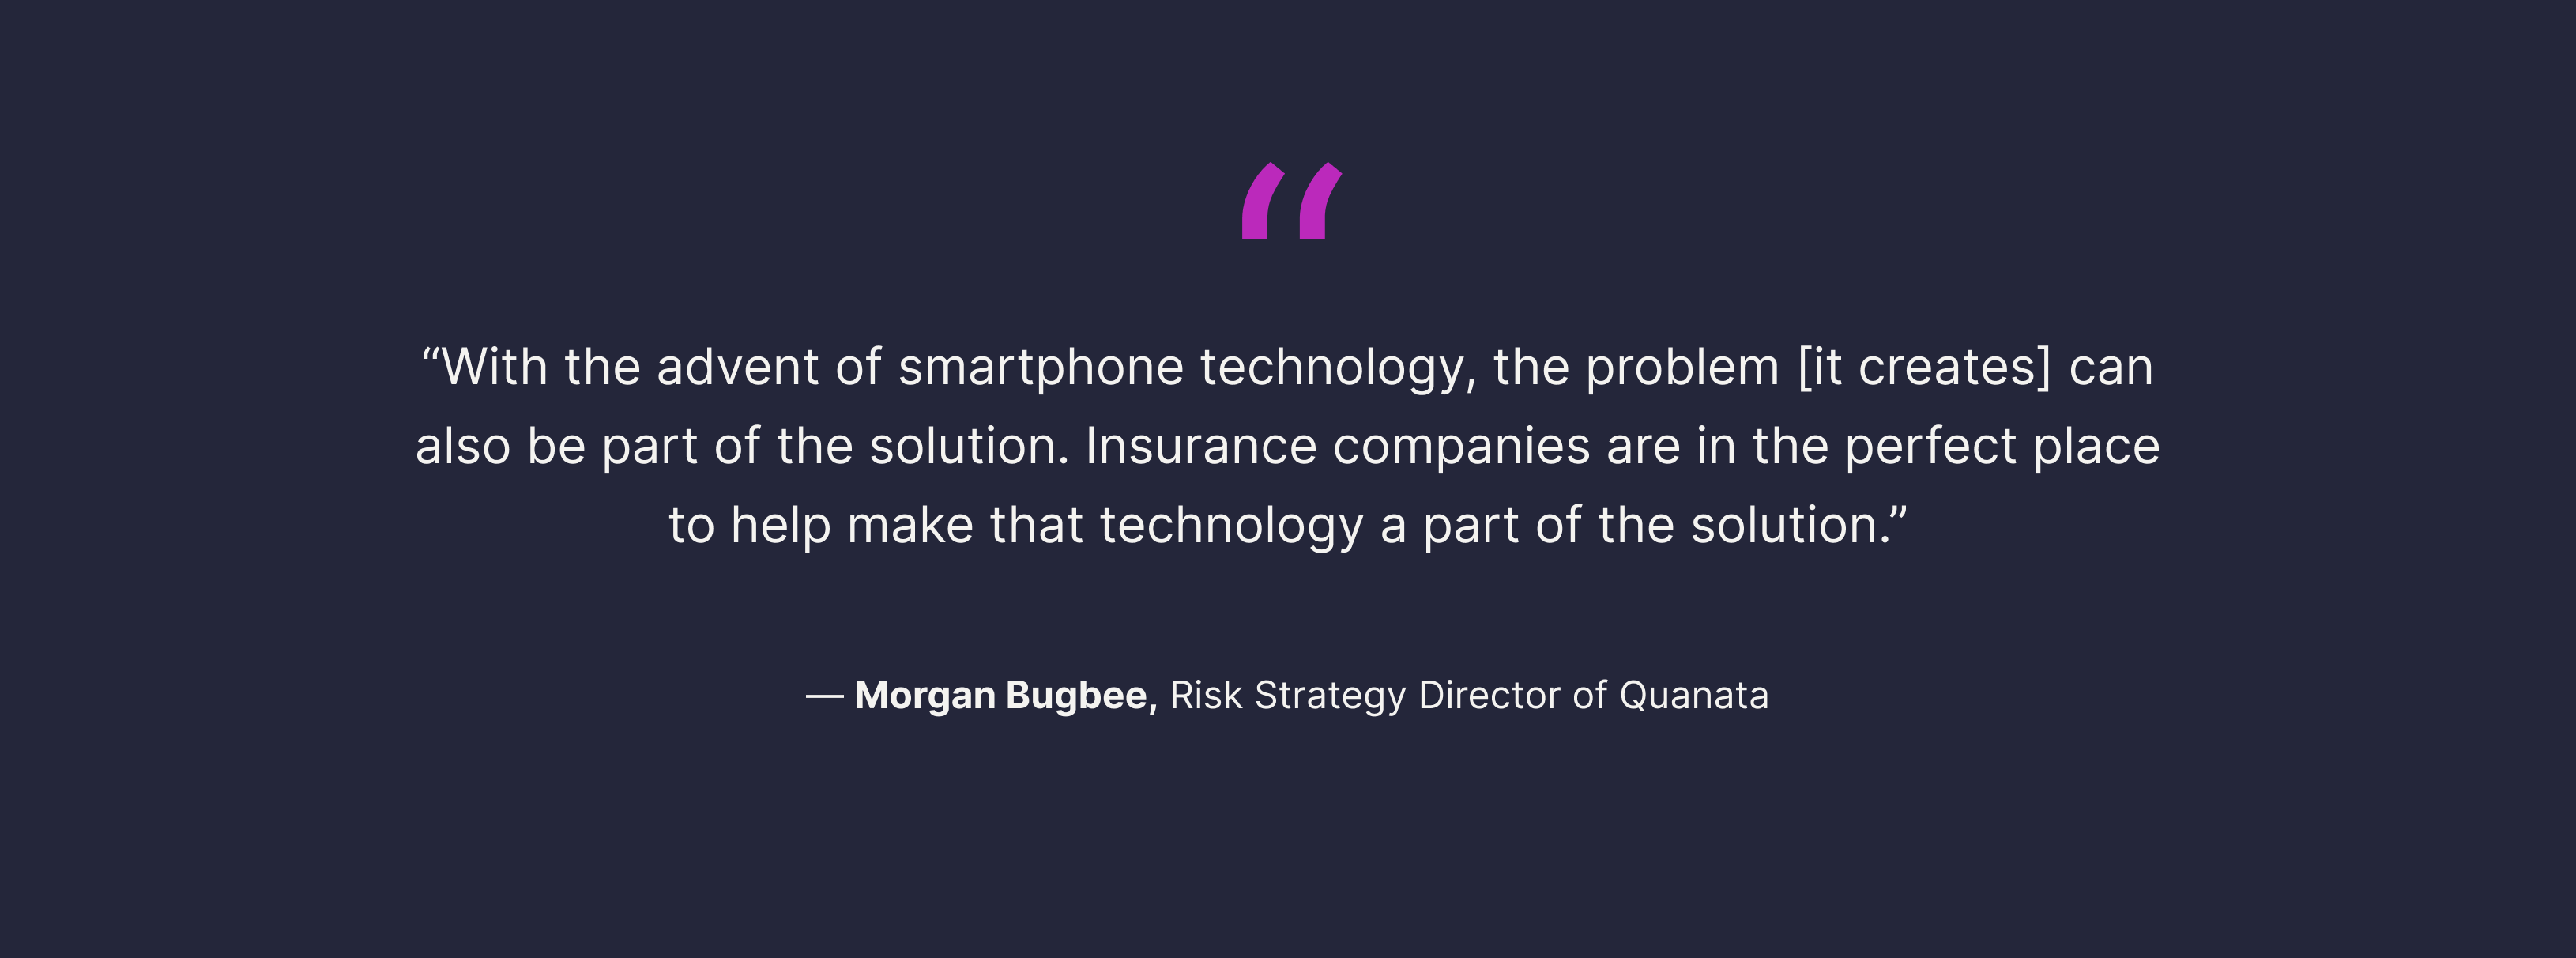 Quote image by Morgan Bugbee, Risk Strategy Director at Quanata, discussing the dual role of smartphone technology in creating and solving problems, with a focus on insurance companies.